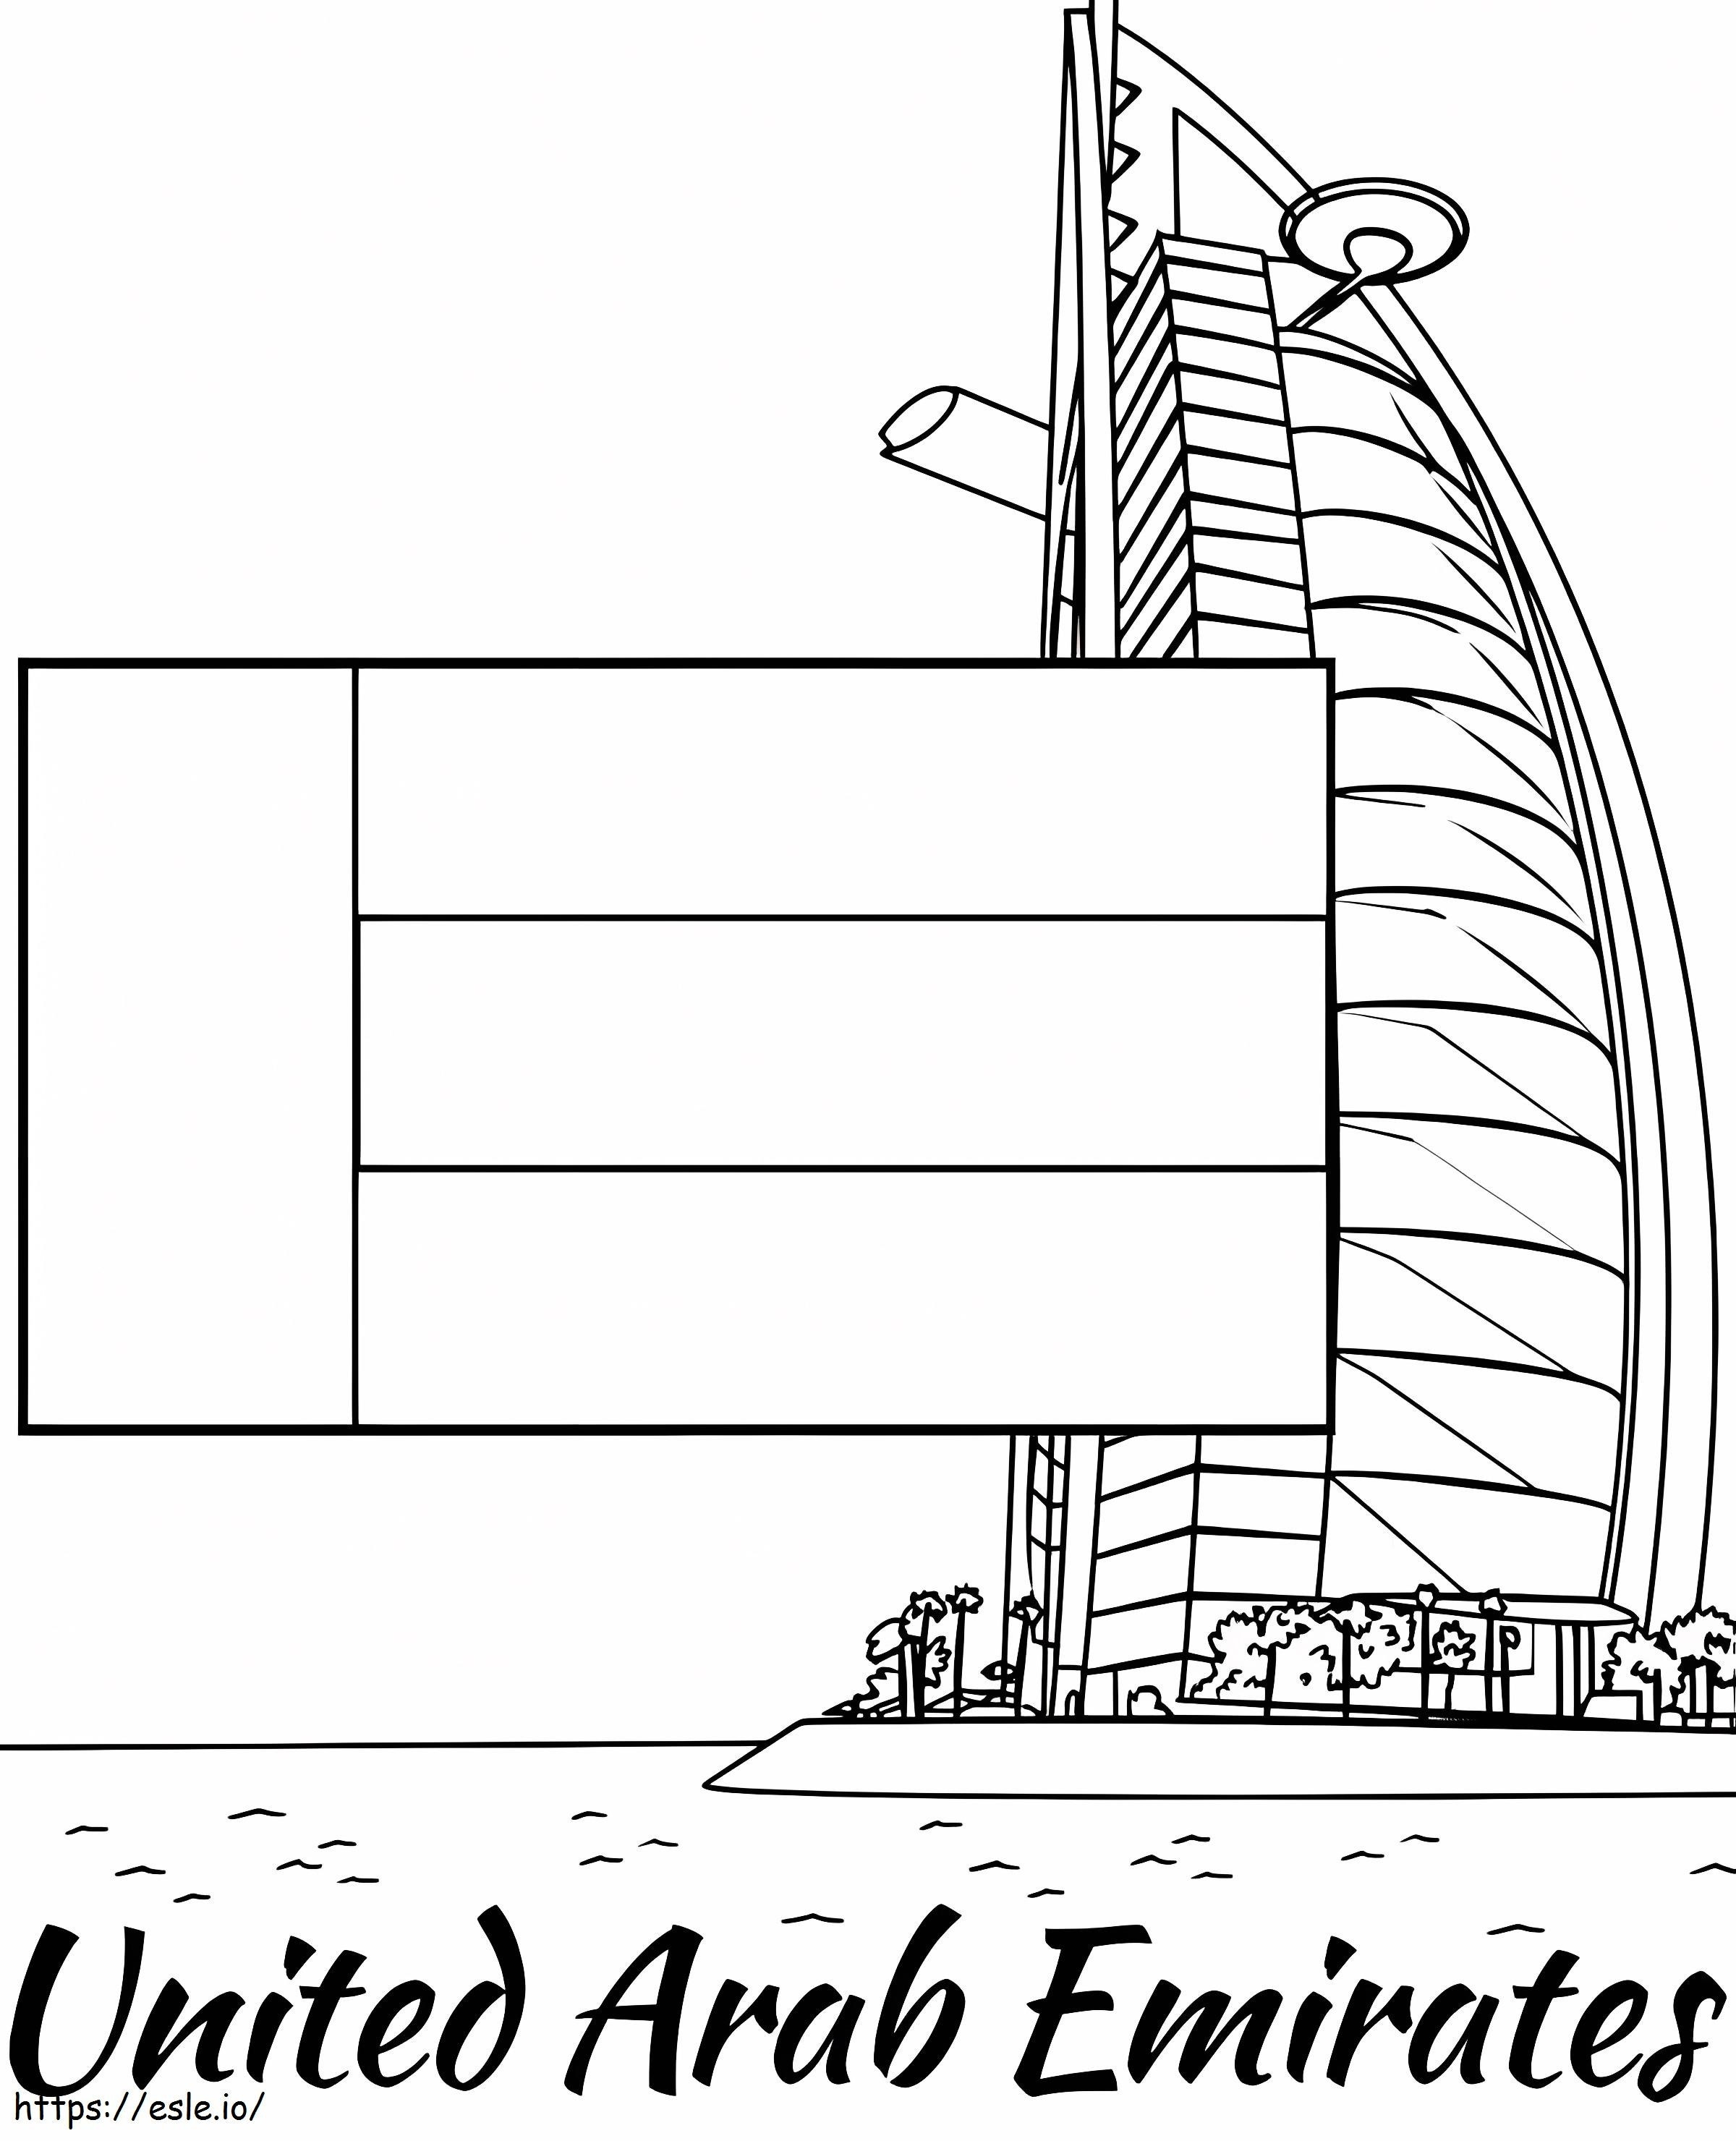 United Arab Emirates 1 coloring page